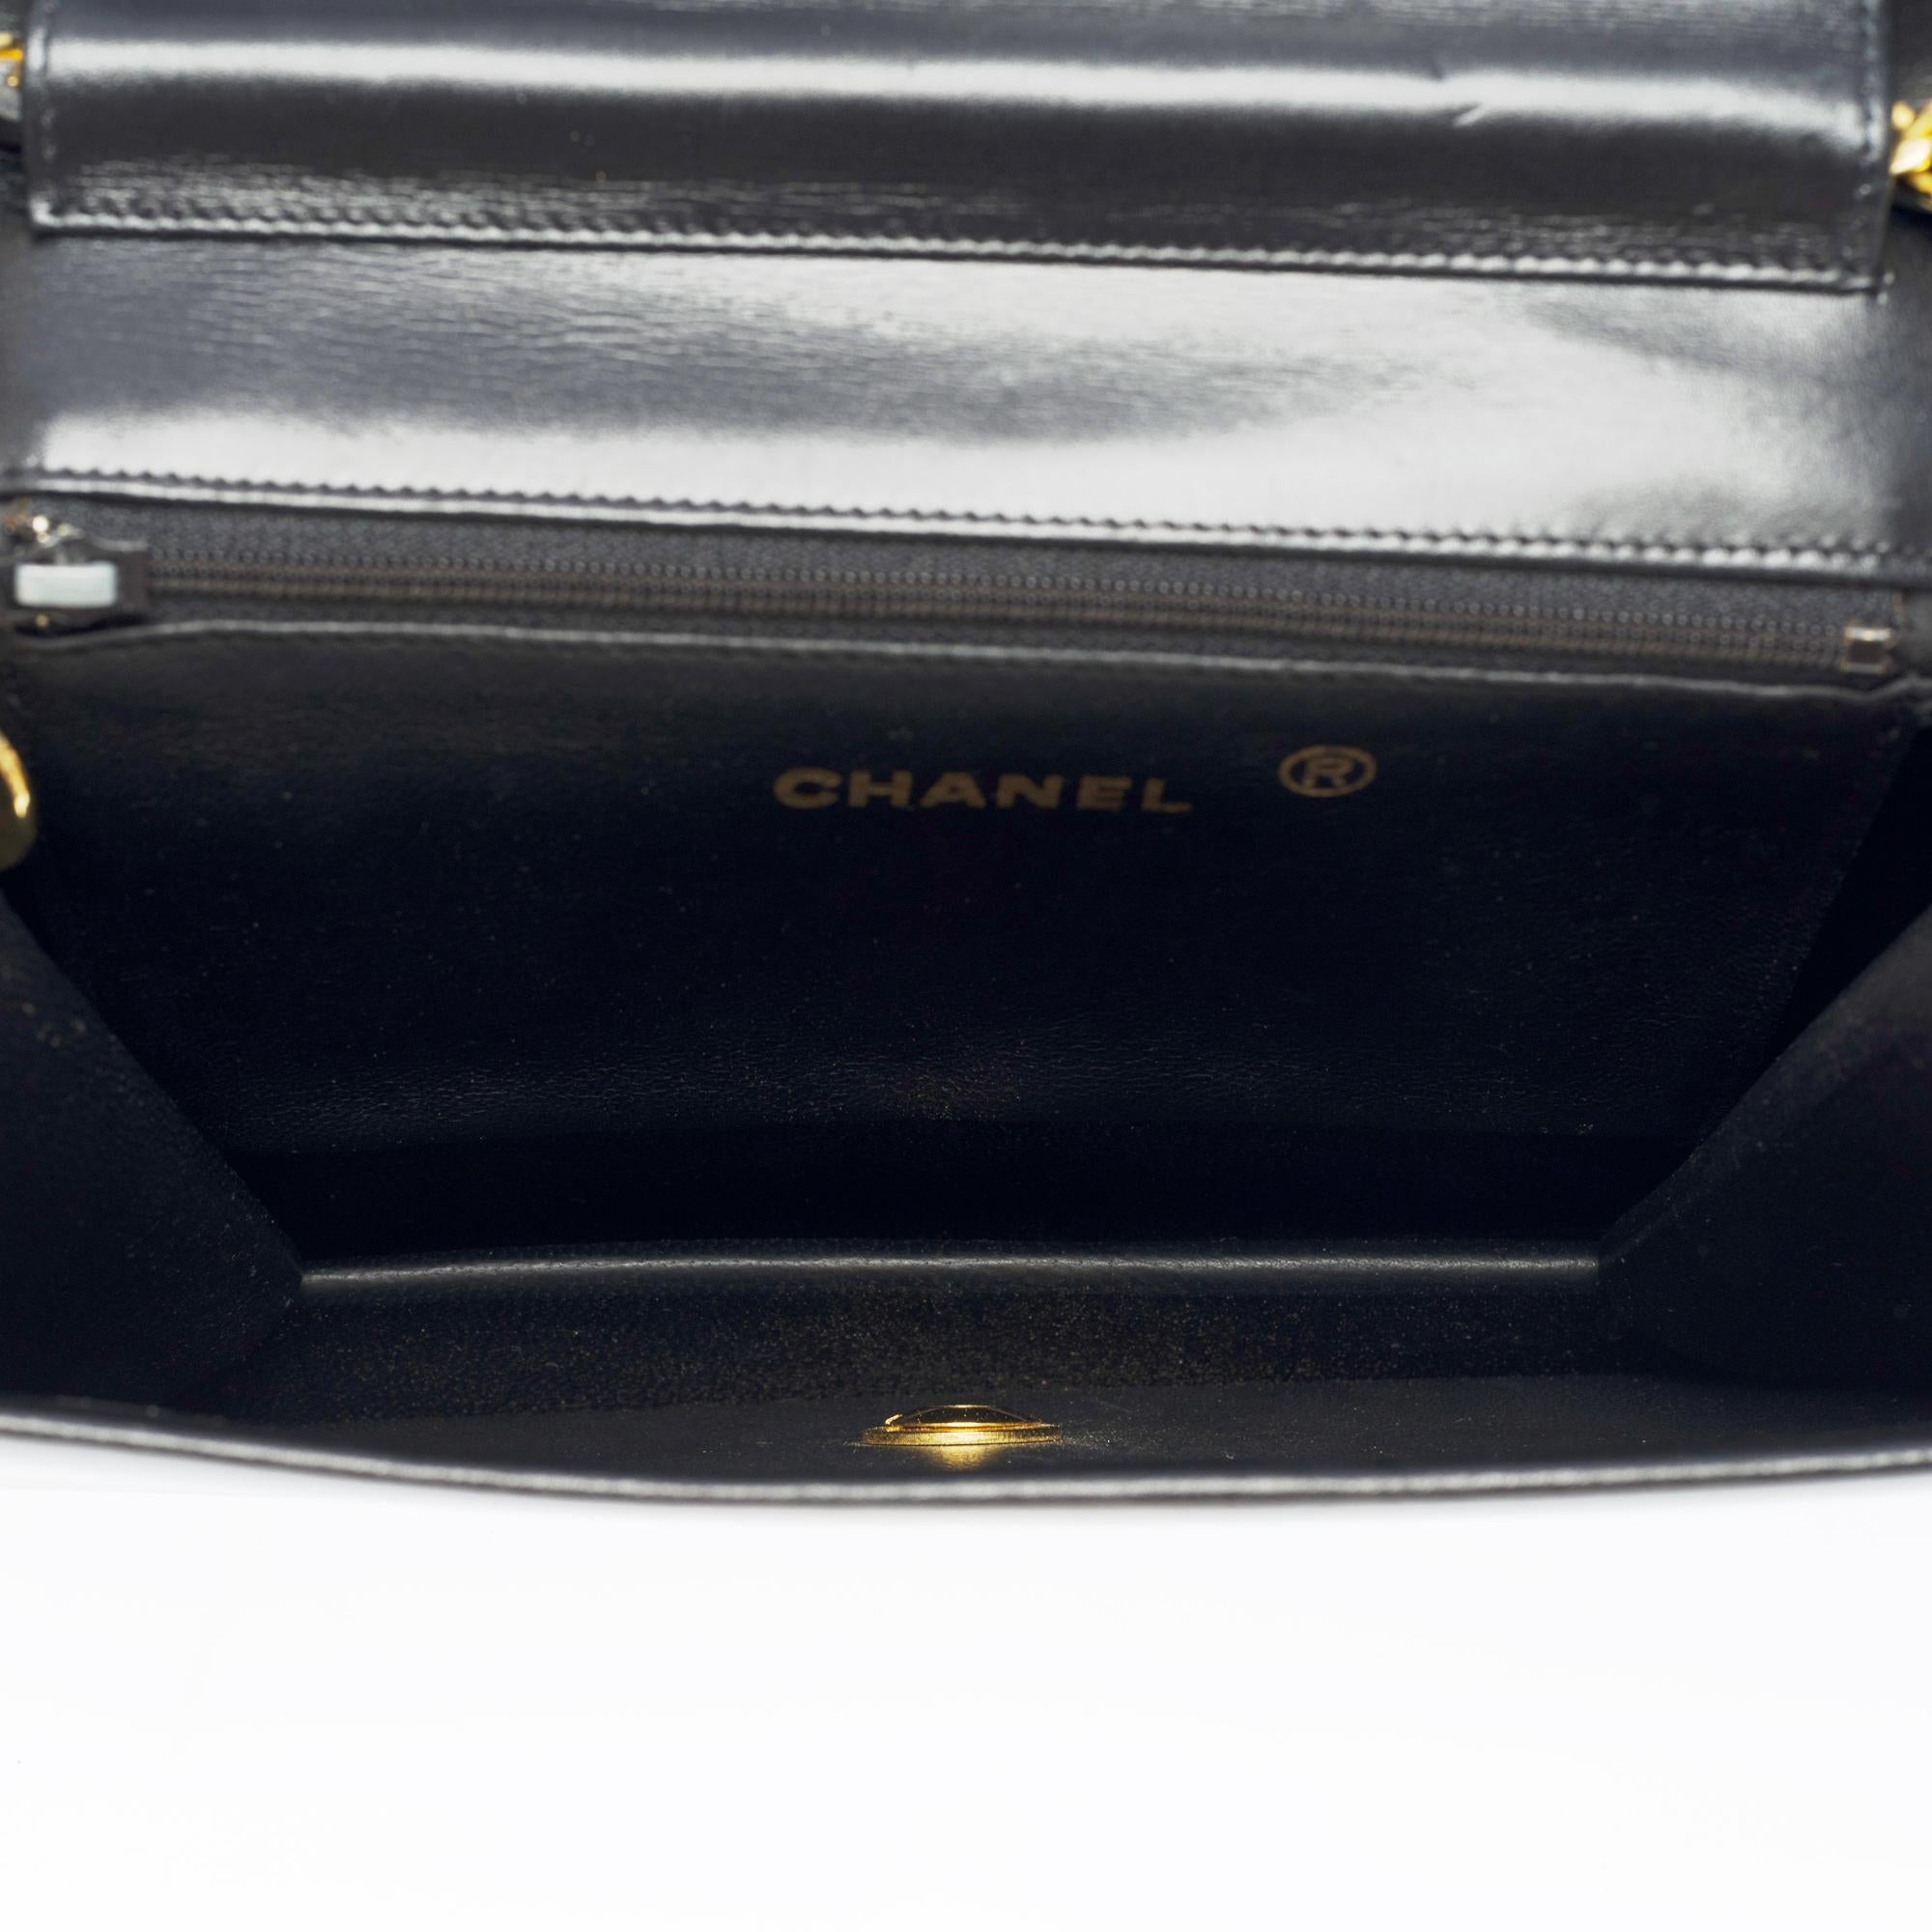 Gorgeous Chanel Classic shoulder flap bag in black box calfskin leather, GHW 3